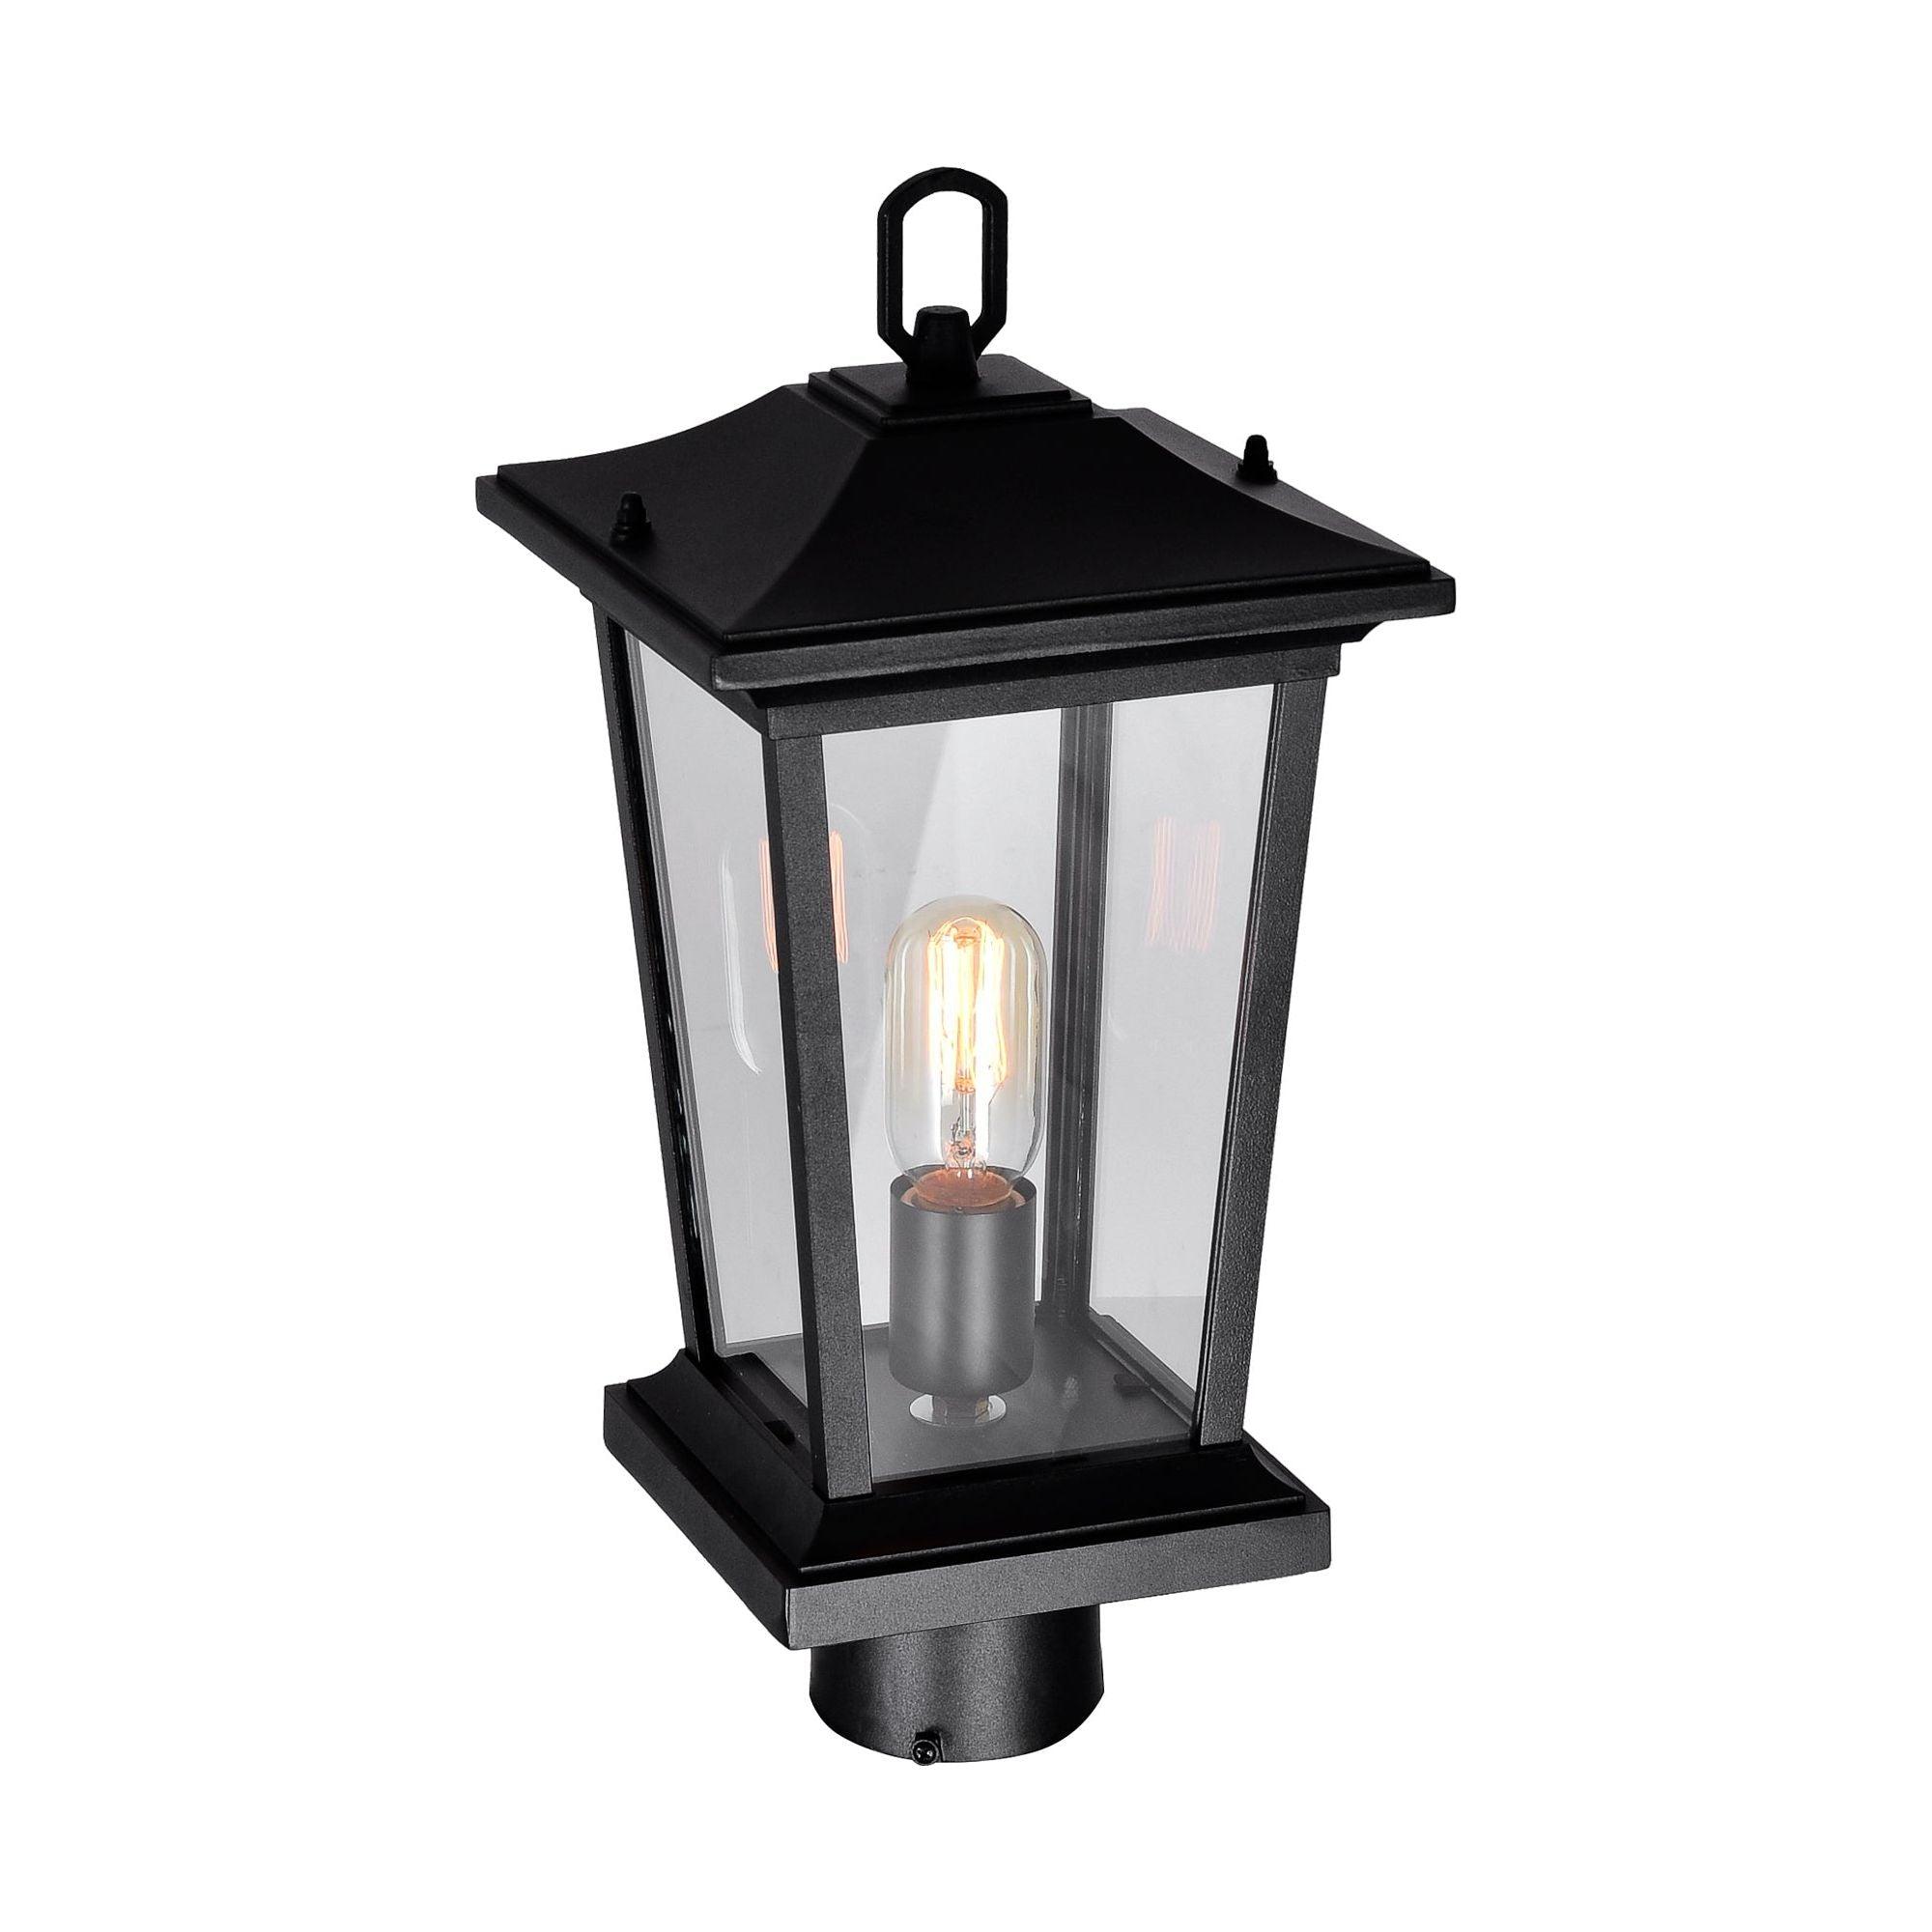 CWI - Leawood 1-Light Outdoor Post Light - Lights Canada